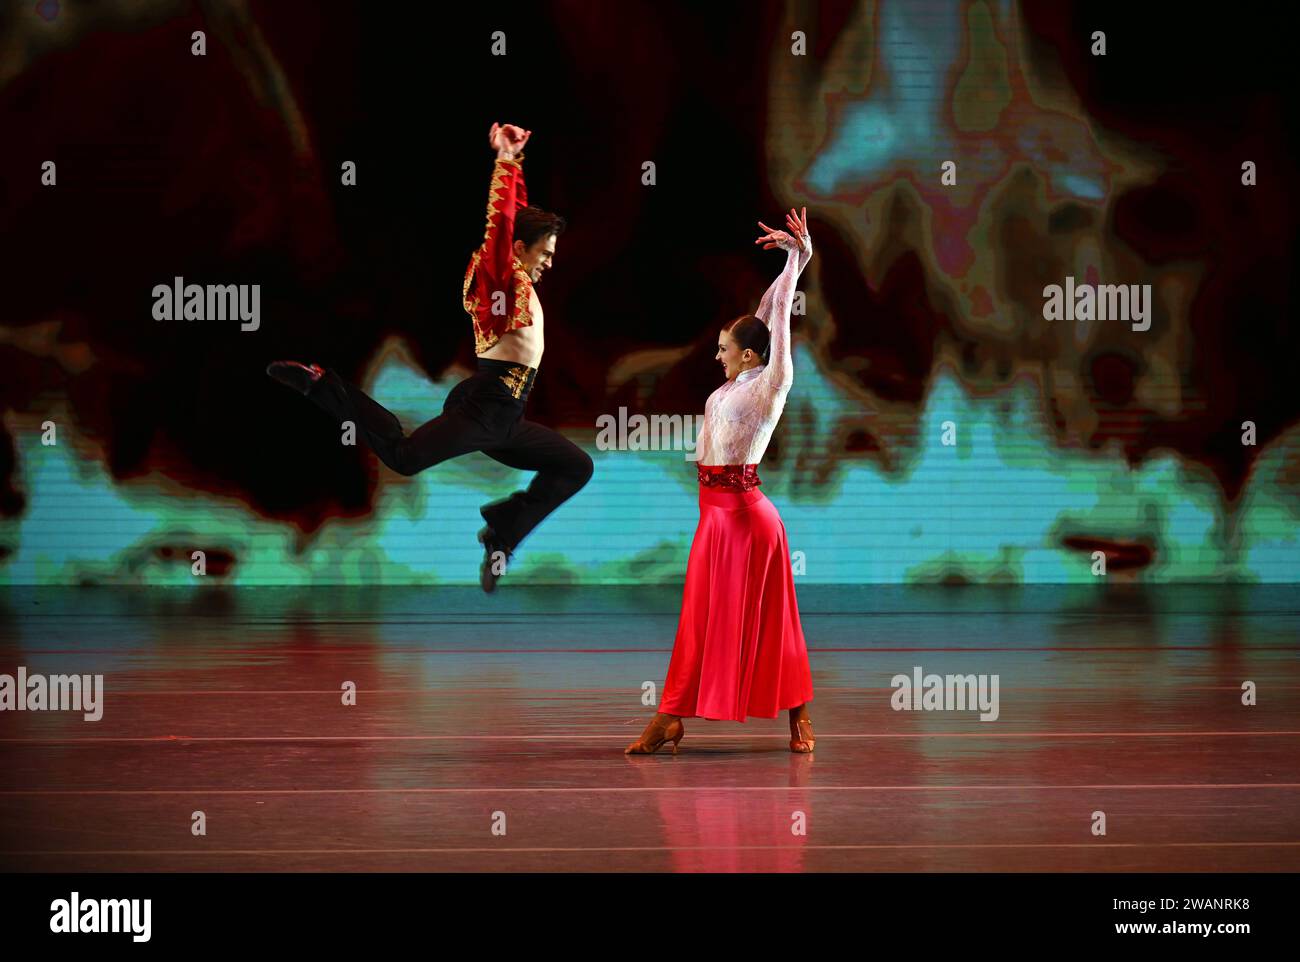 Beijing, China. 5th Jan, 2024. Artists perform at the Beijing Tianqiao Theater in Beijing, capital of China, Jan. 5, 2024. The sixth China International Ballet Season concluded on Friday, which gave 10 major shows and 23 performances by artists from the National Ballet of China, the Eifman Ballet of St. Petersburg of Russia, the Stuttgart Ballet of Germany. Credit: Jin Liangkuai/Xinhua/Alamy Live News Stock Photo